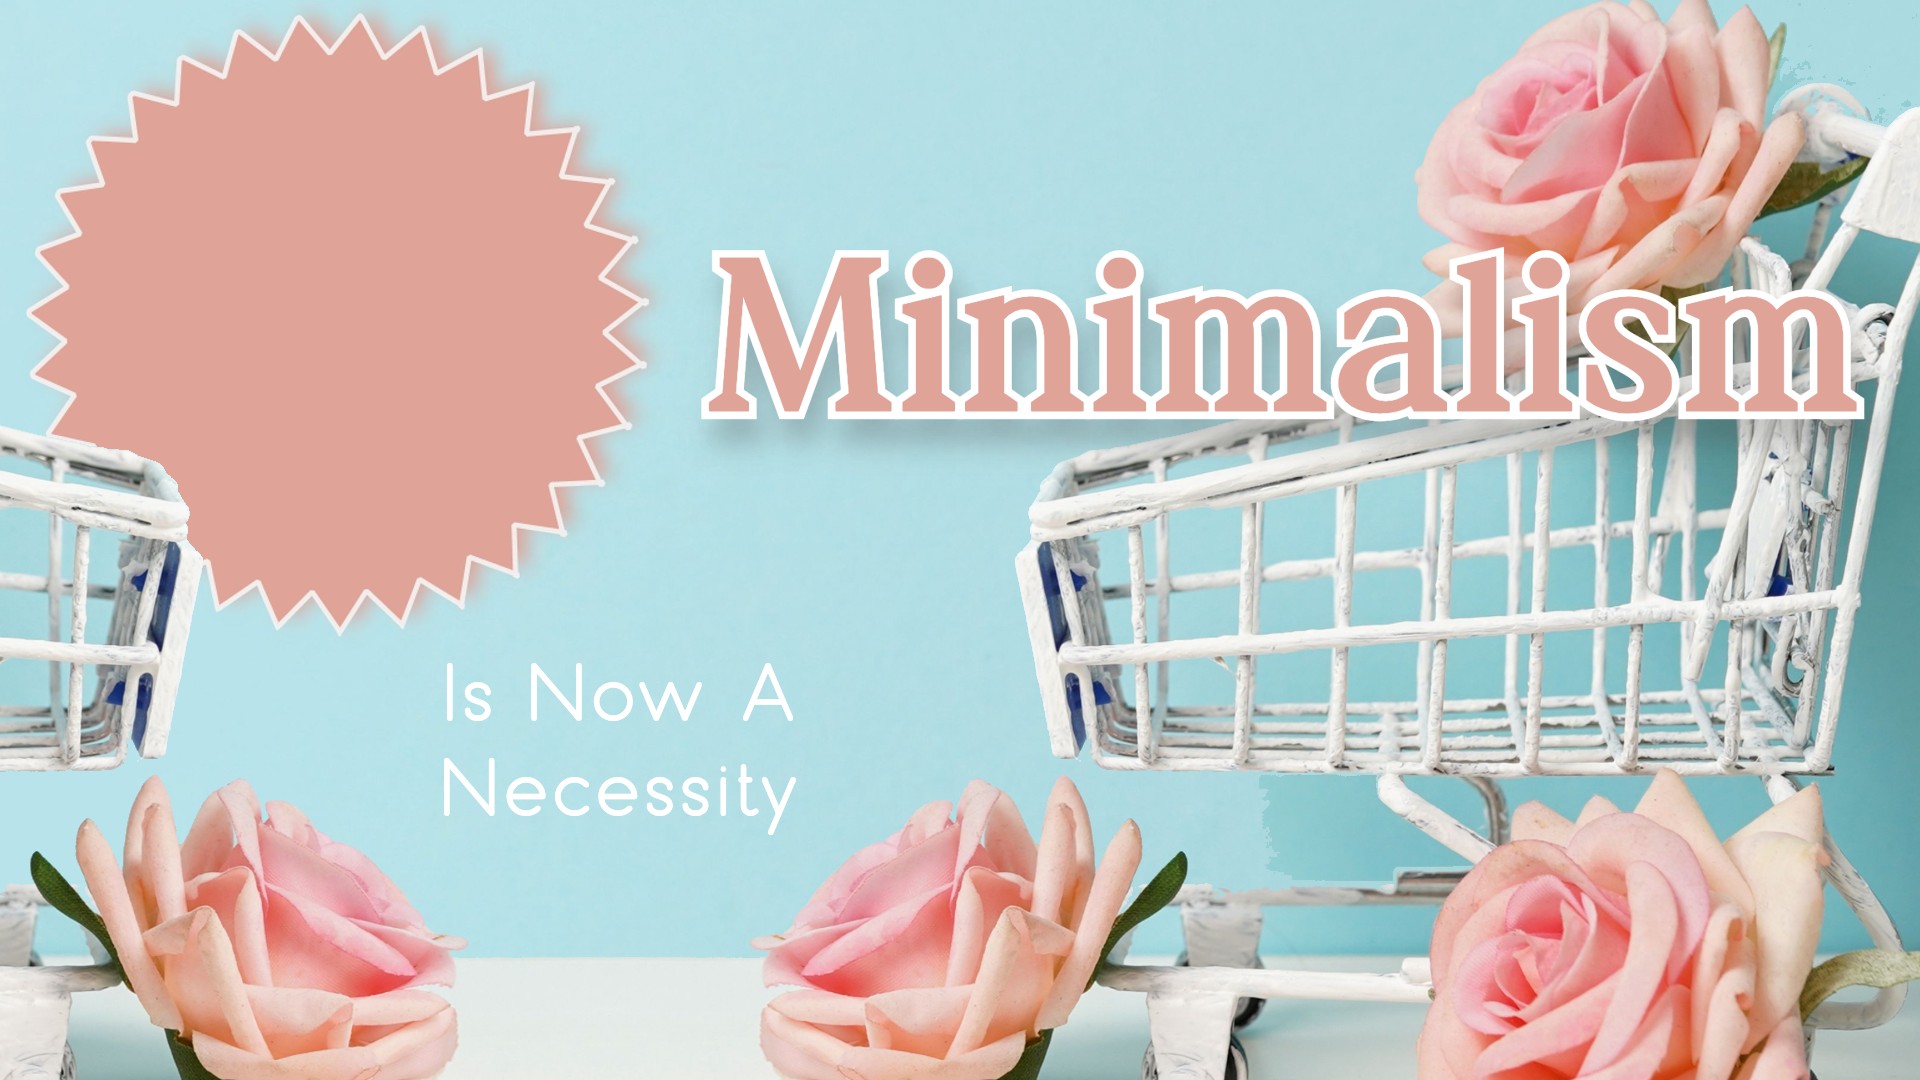 Minimalism is Now a Necessity: We Can No Longer Afford Stuff